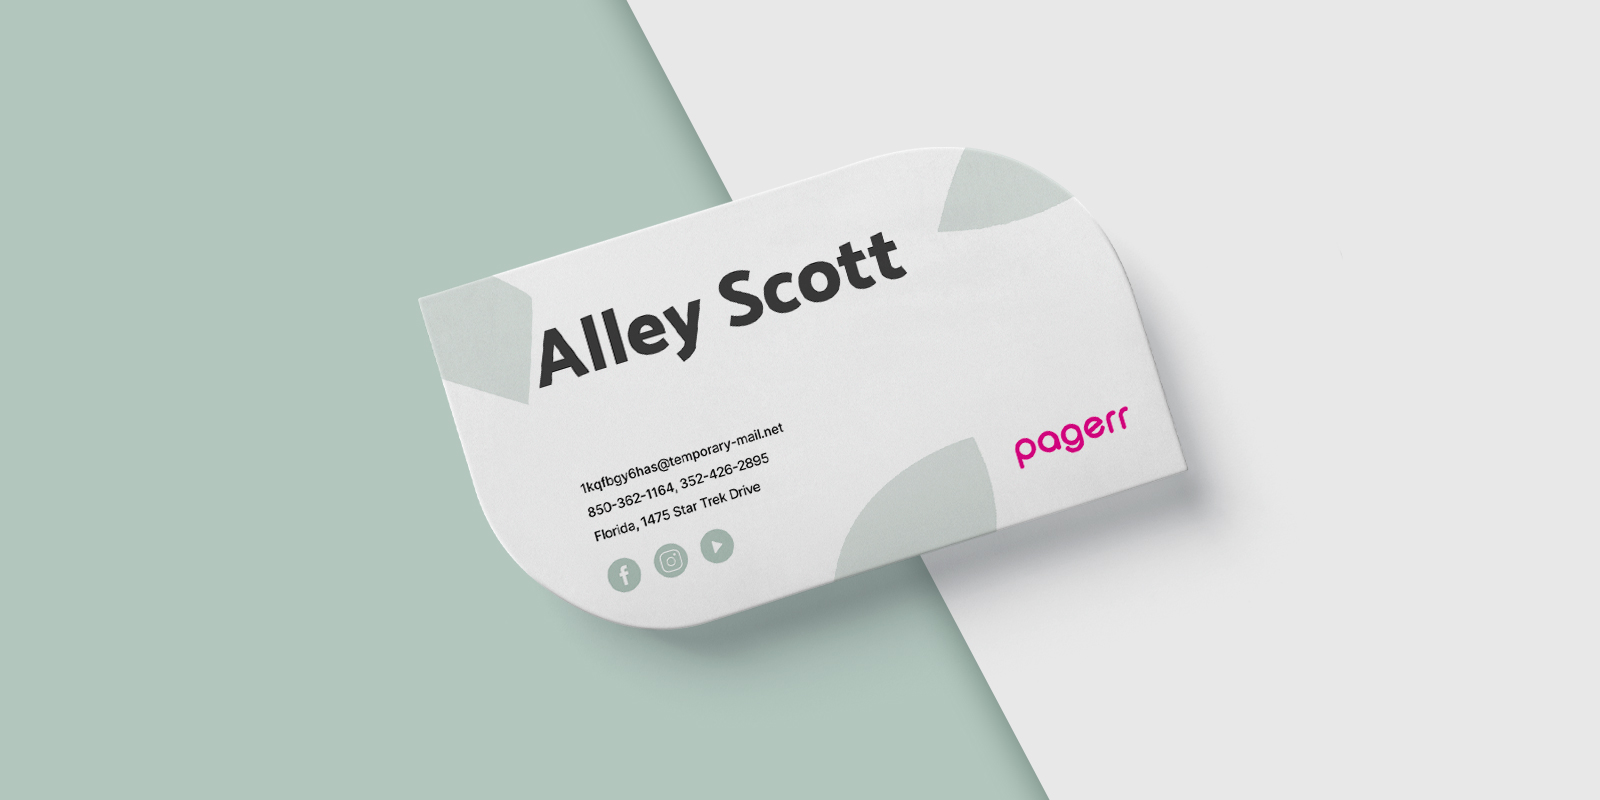 Special shape business cards in Perth - Print with Pagerr